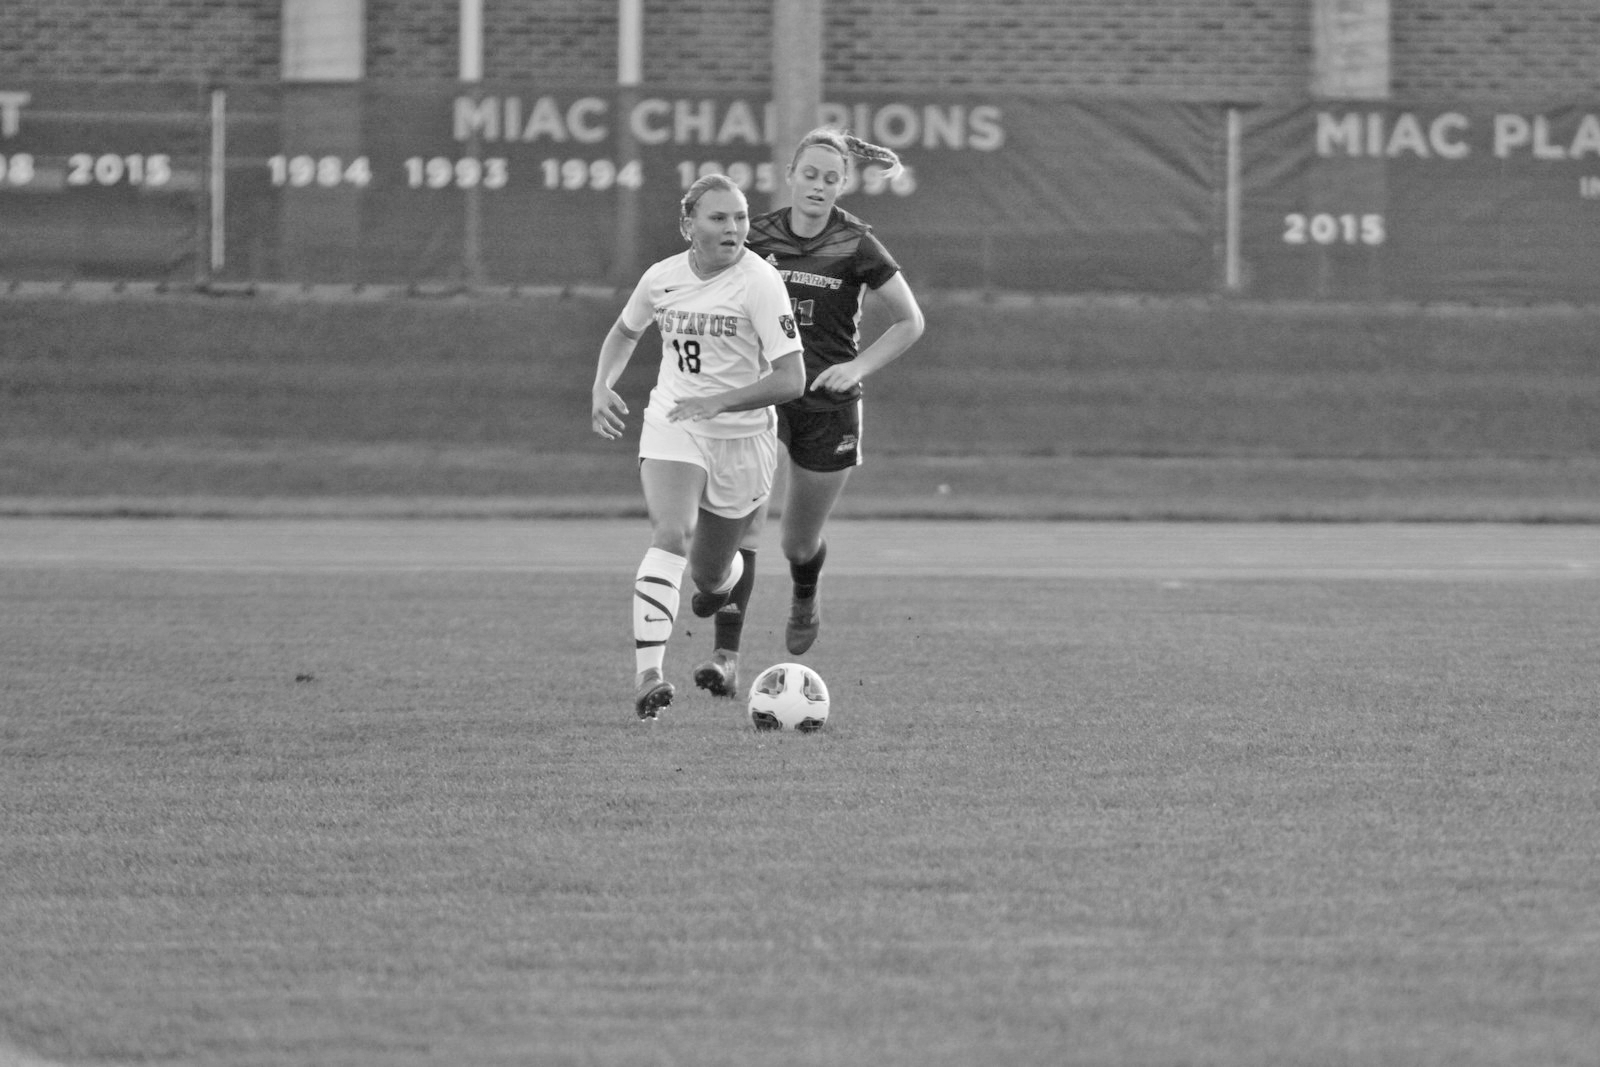 Junior Taylor Hemme takes the ball up the field for the Gusties during a match against St. Mary’s earlier this season. Most recently, the Gusties took on St. Olaf and dropped the game 2-1.